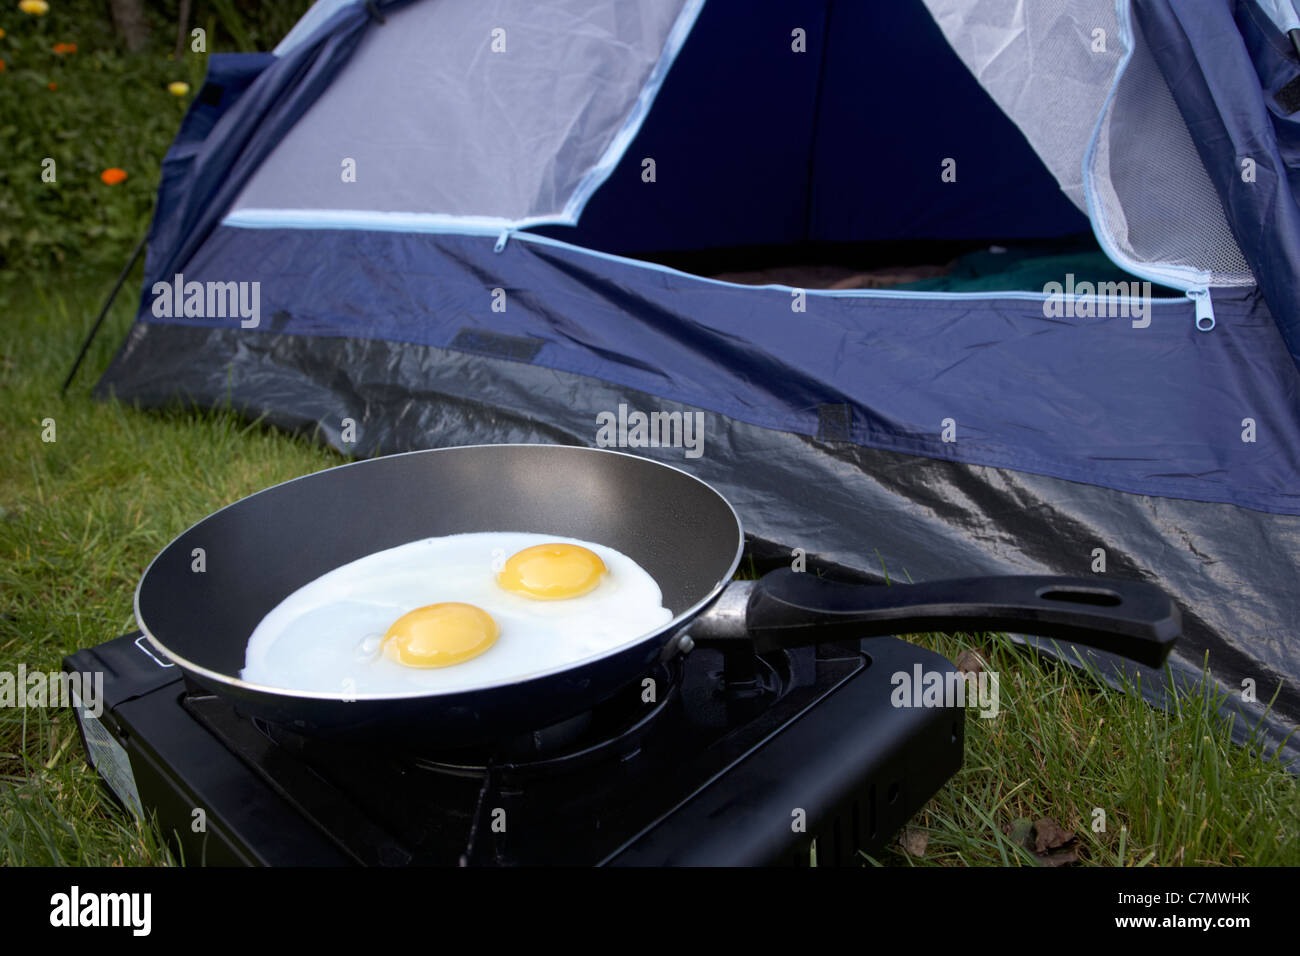 cooking two fried eggs on a small portable gas camping stove in front of the open door of a dome tent Stock Photo